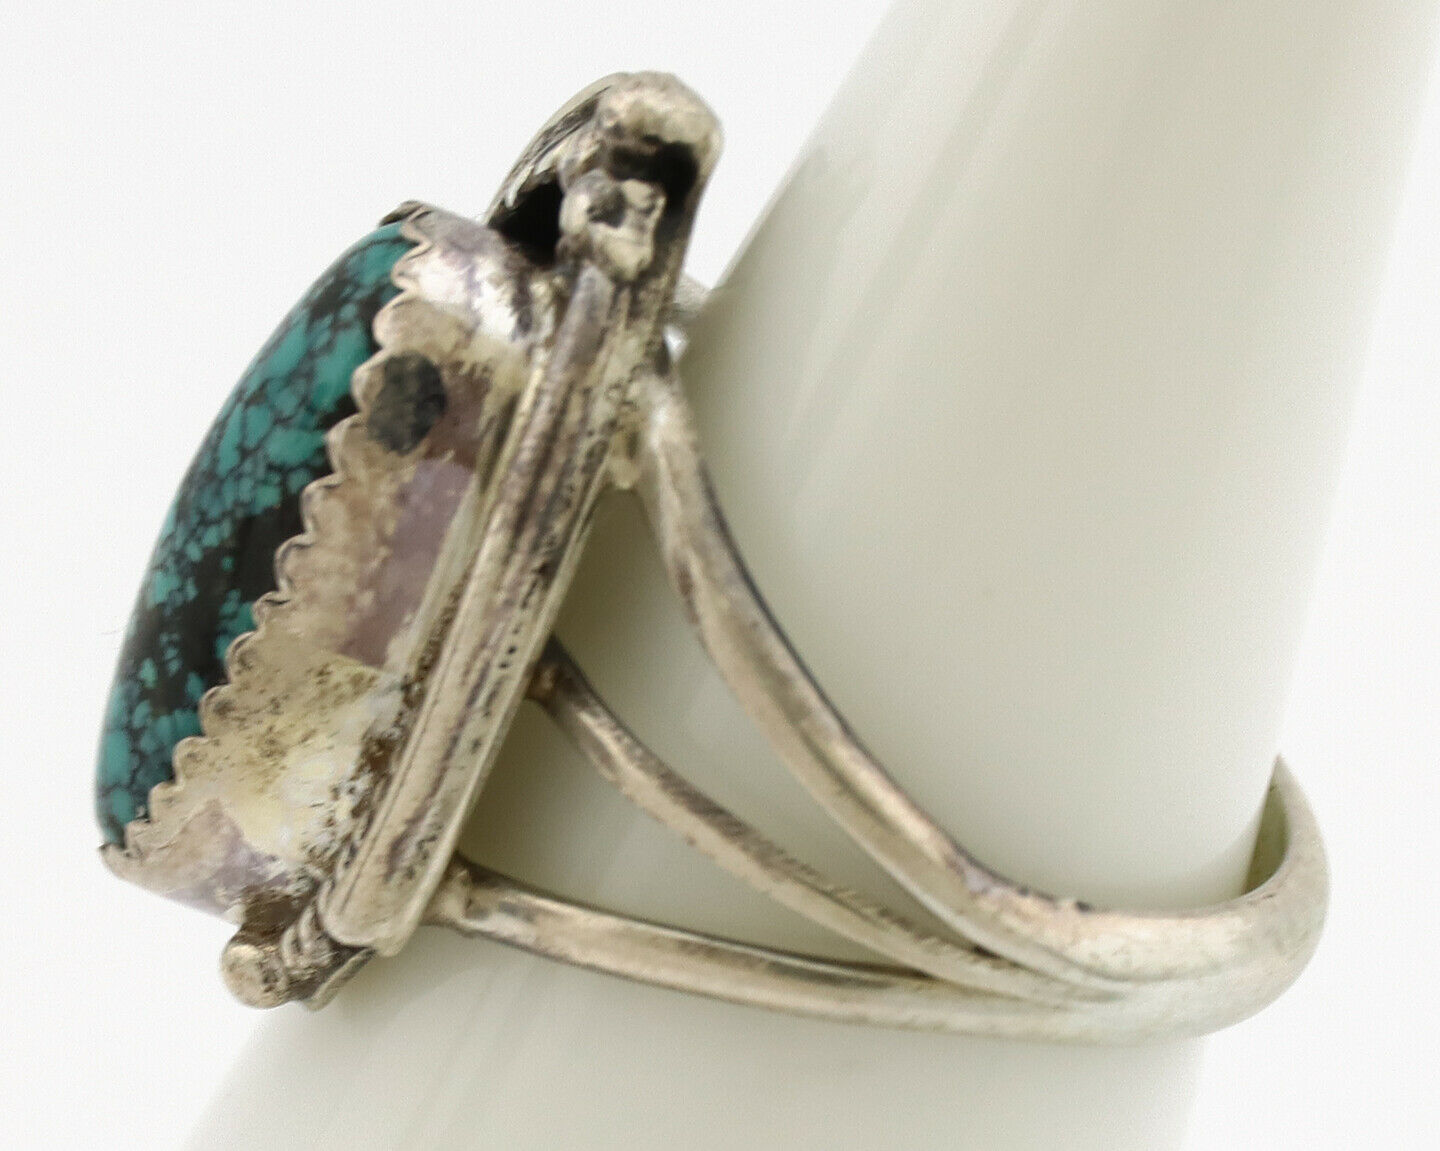 Navajo Ring .925 Silver Spiderweb Turquoise Artist Signed S King C.1980's